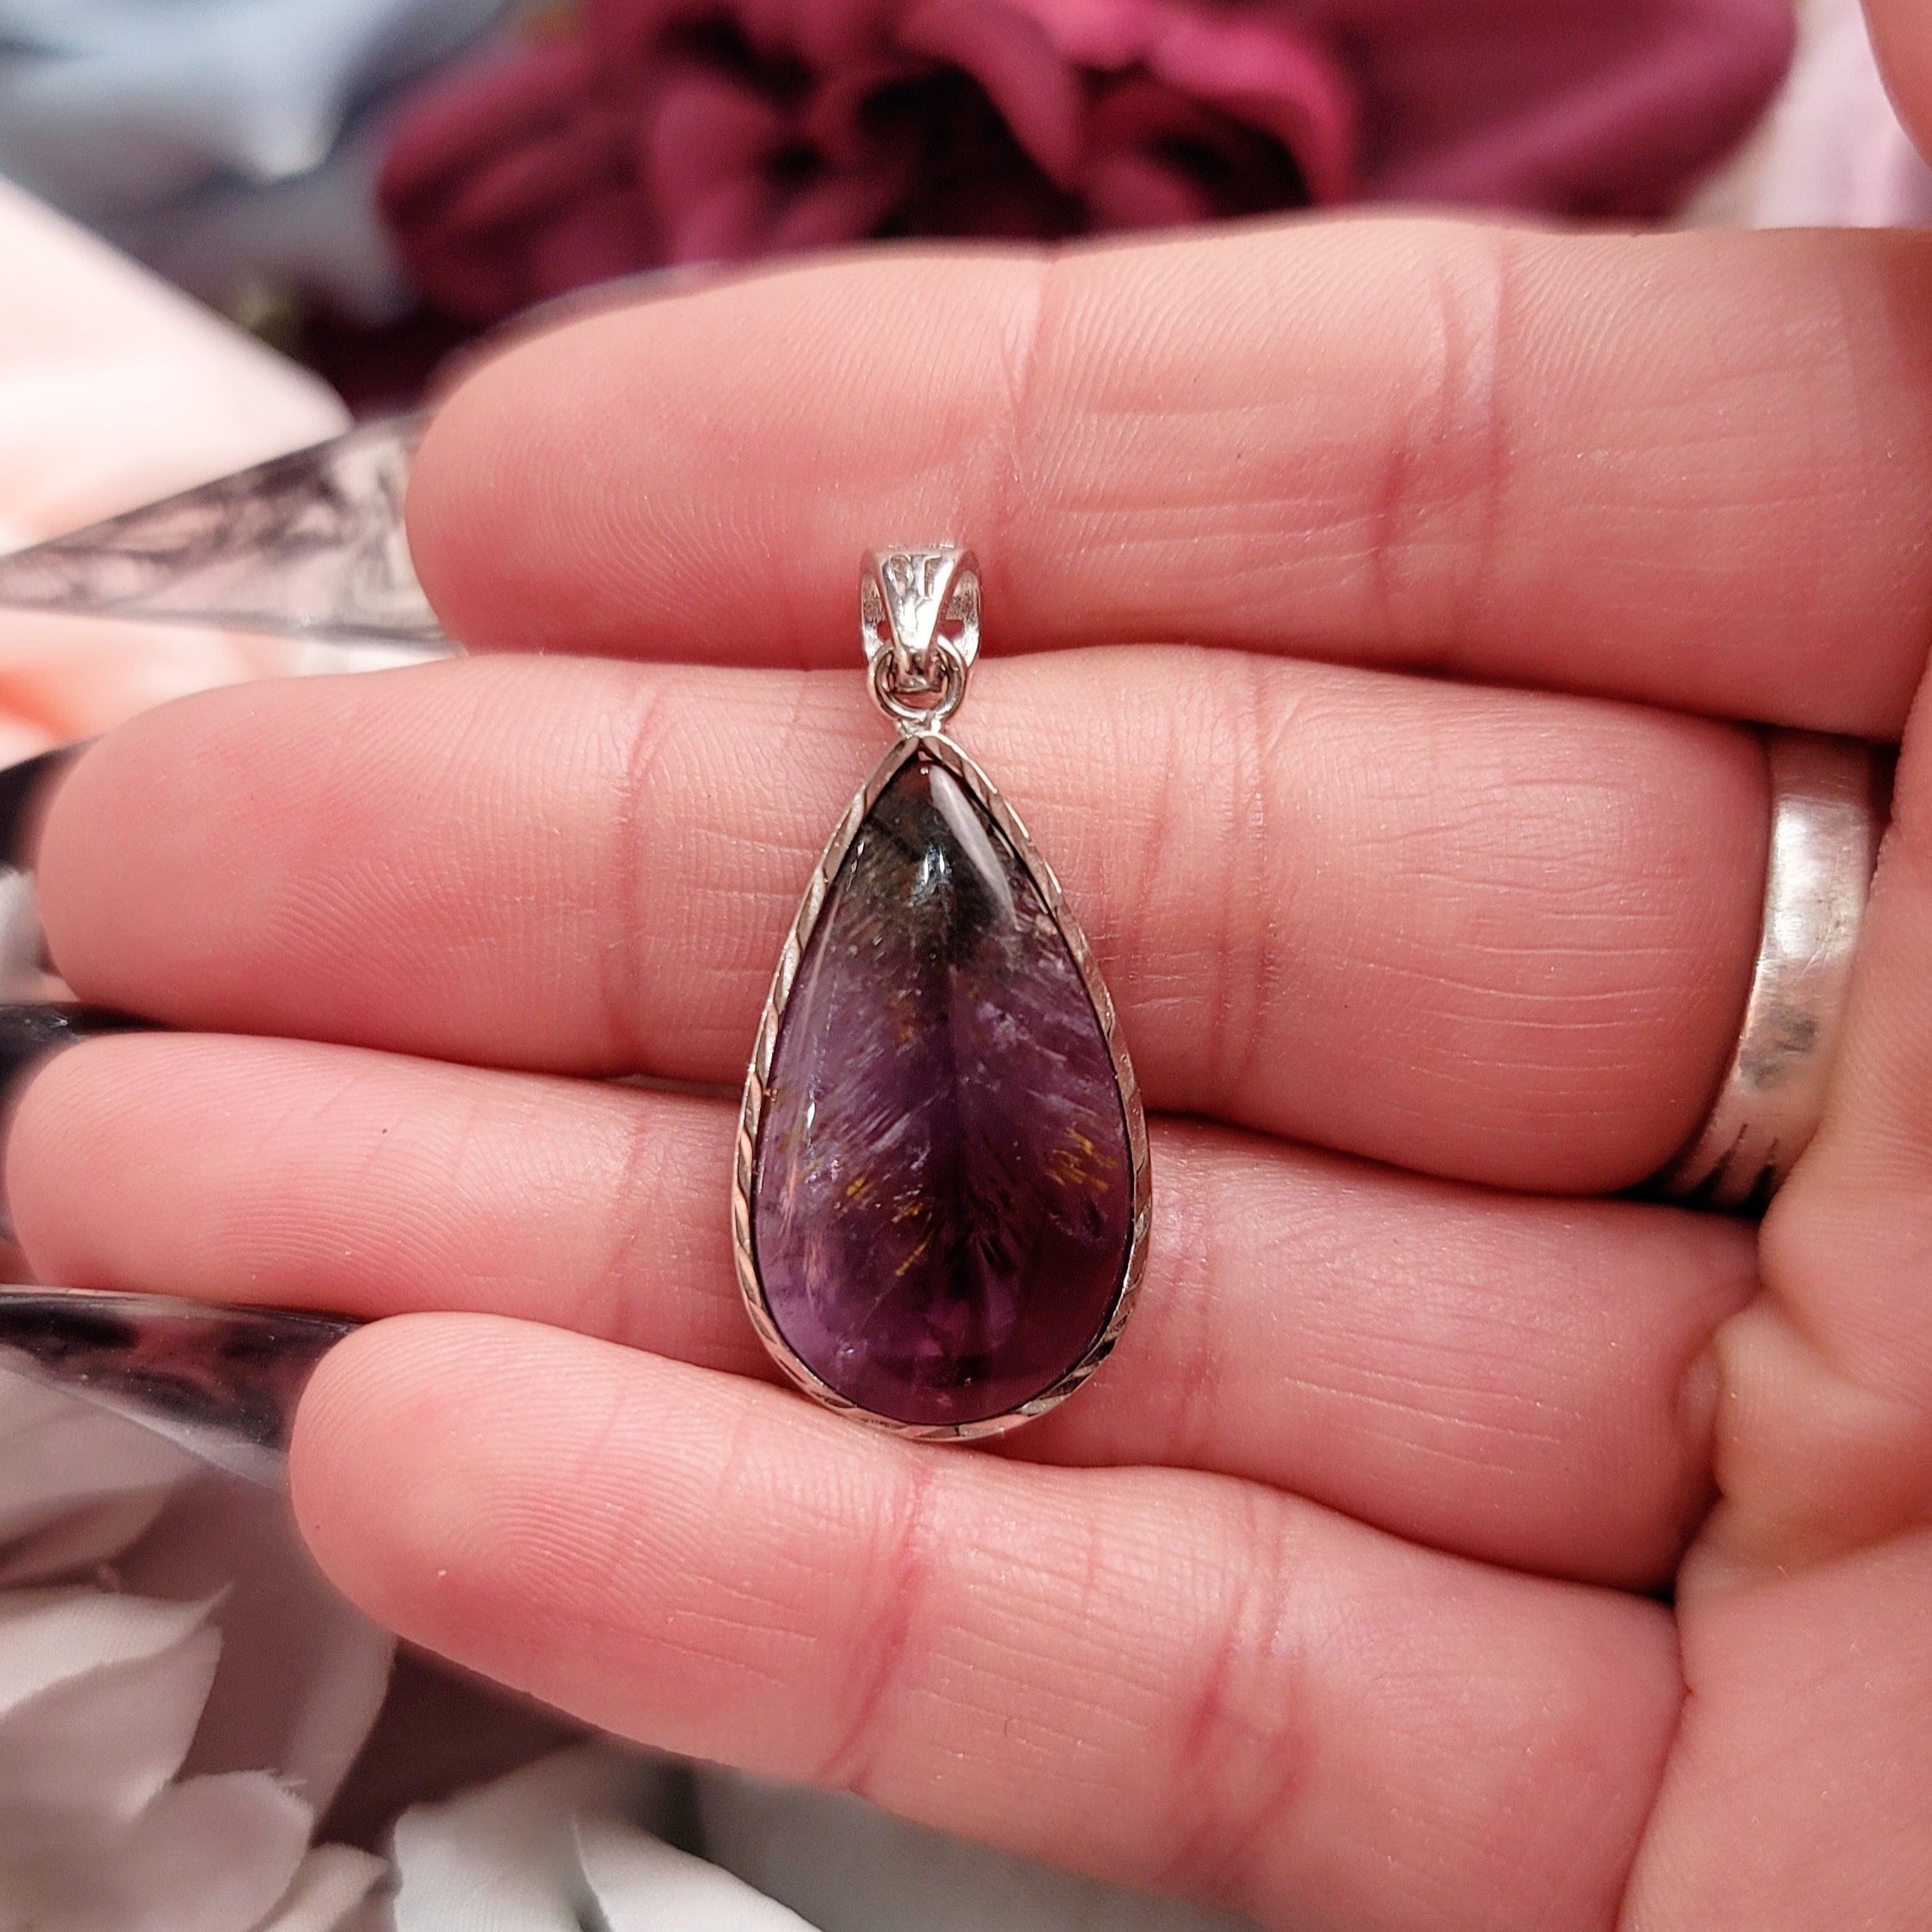 Auralite 23 Pendant for Emotional and Physical Healing